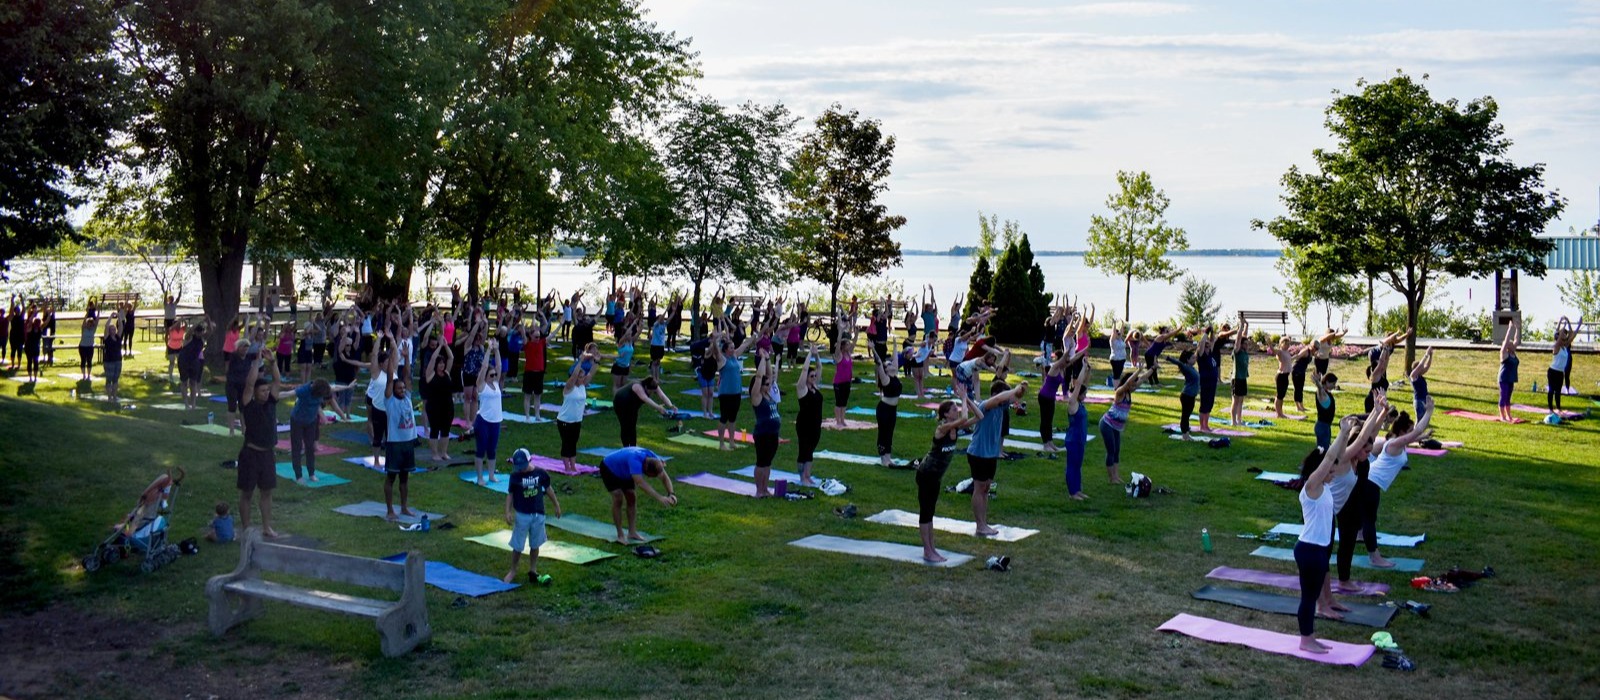 Hundreds of people reaching to the sky by the Pembroke Waterfront. Doing Yoga by the water.